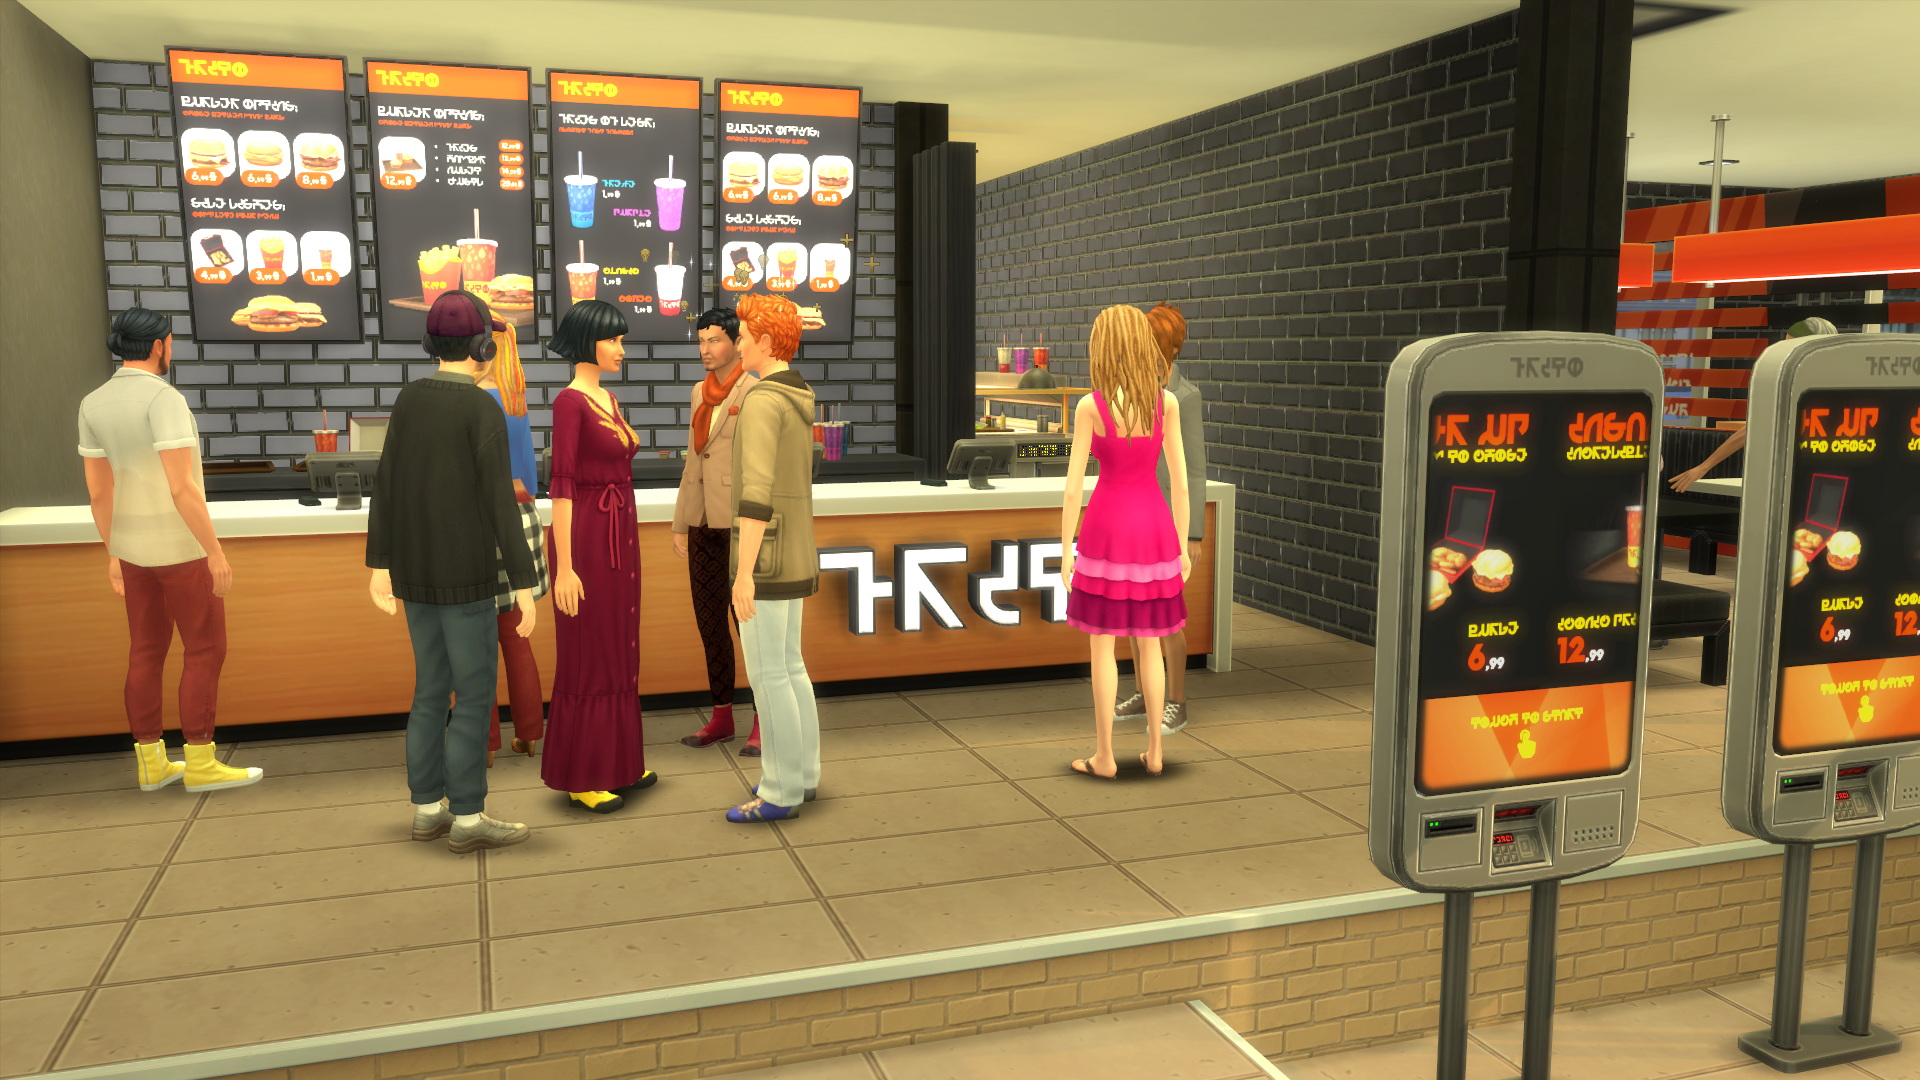 sims 4 dine out mods